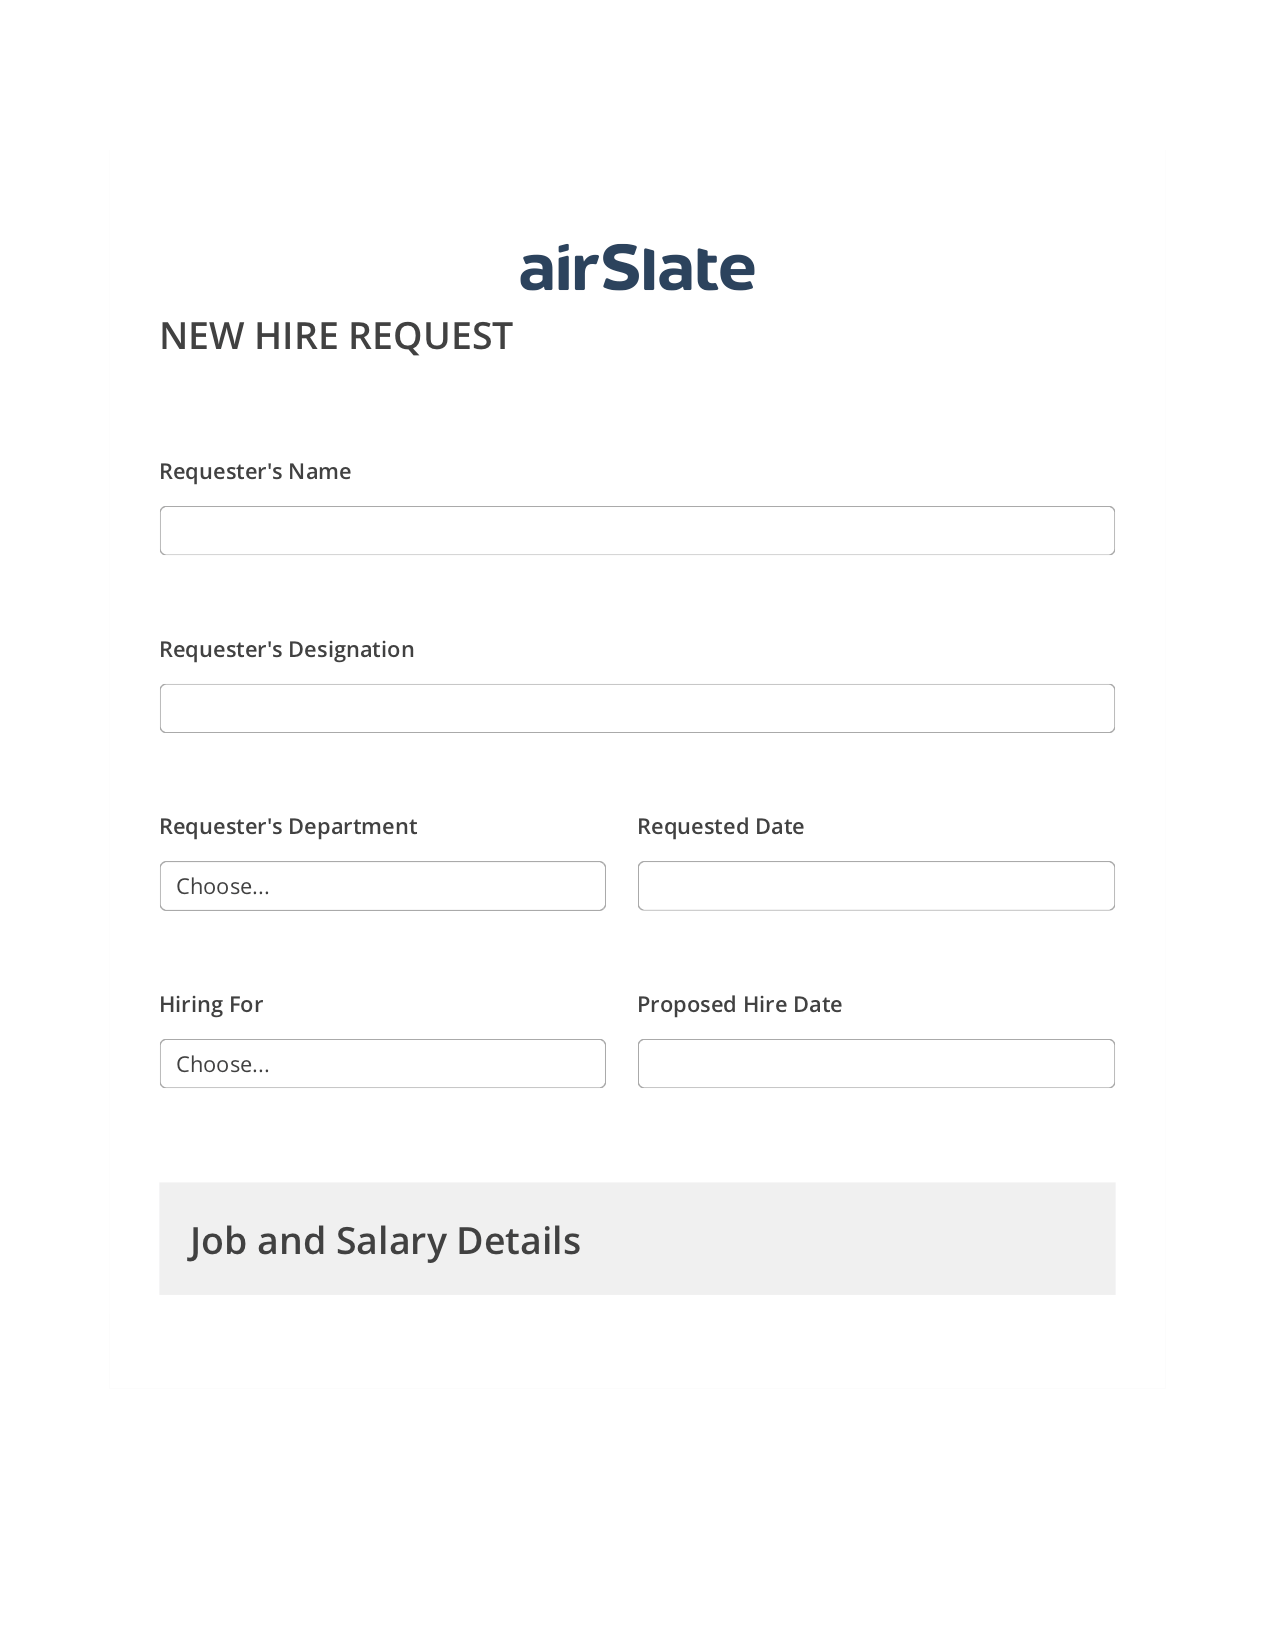 Hiring Request Workflow Pre-fill from Excel Spreadsheet Bot, Update NetSuite Record Bot, Archive to OneDrive Bot